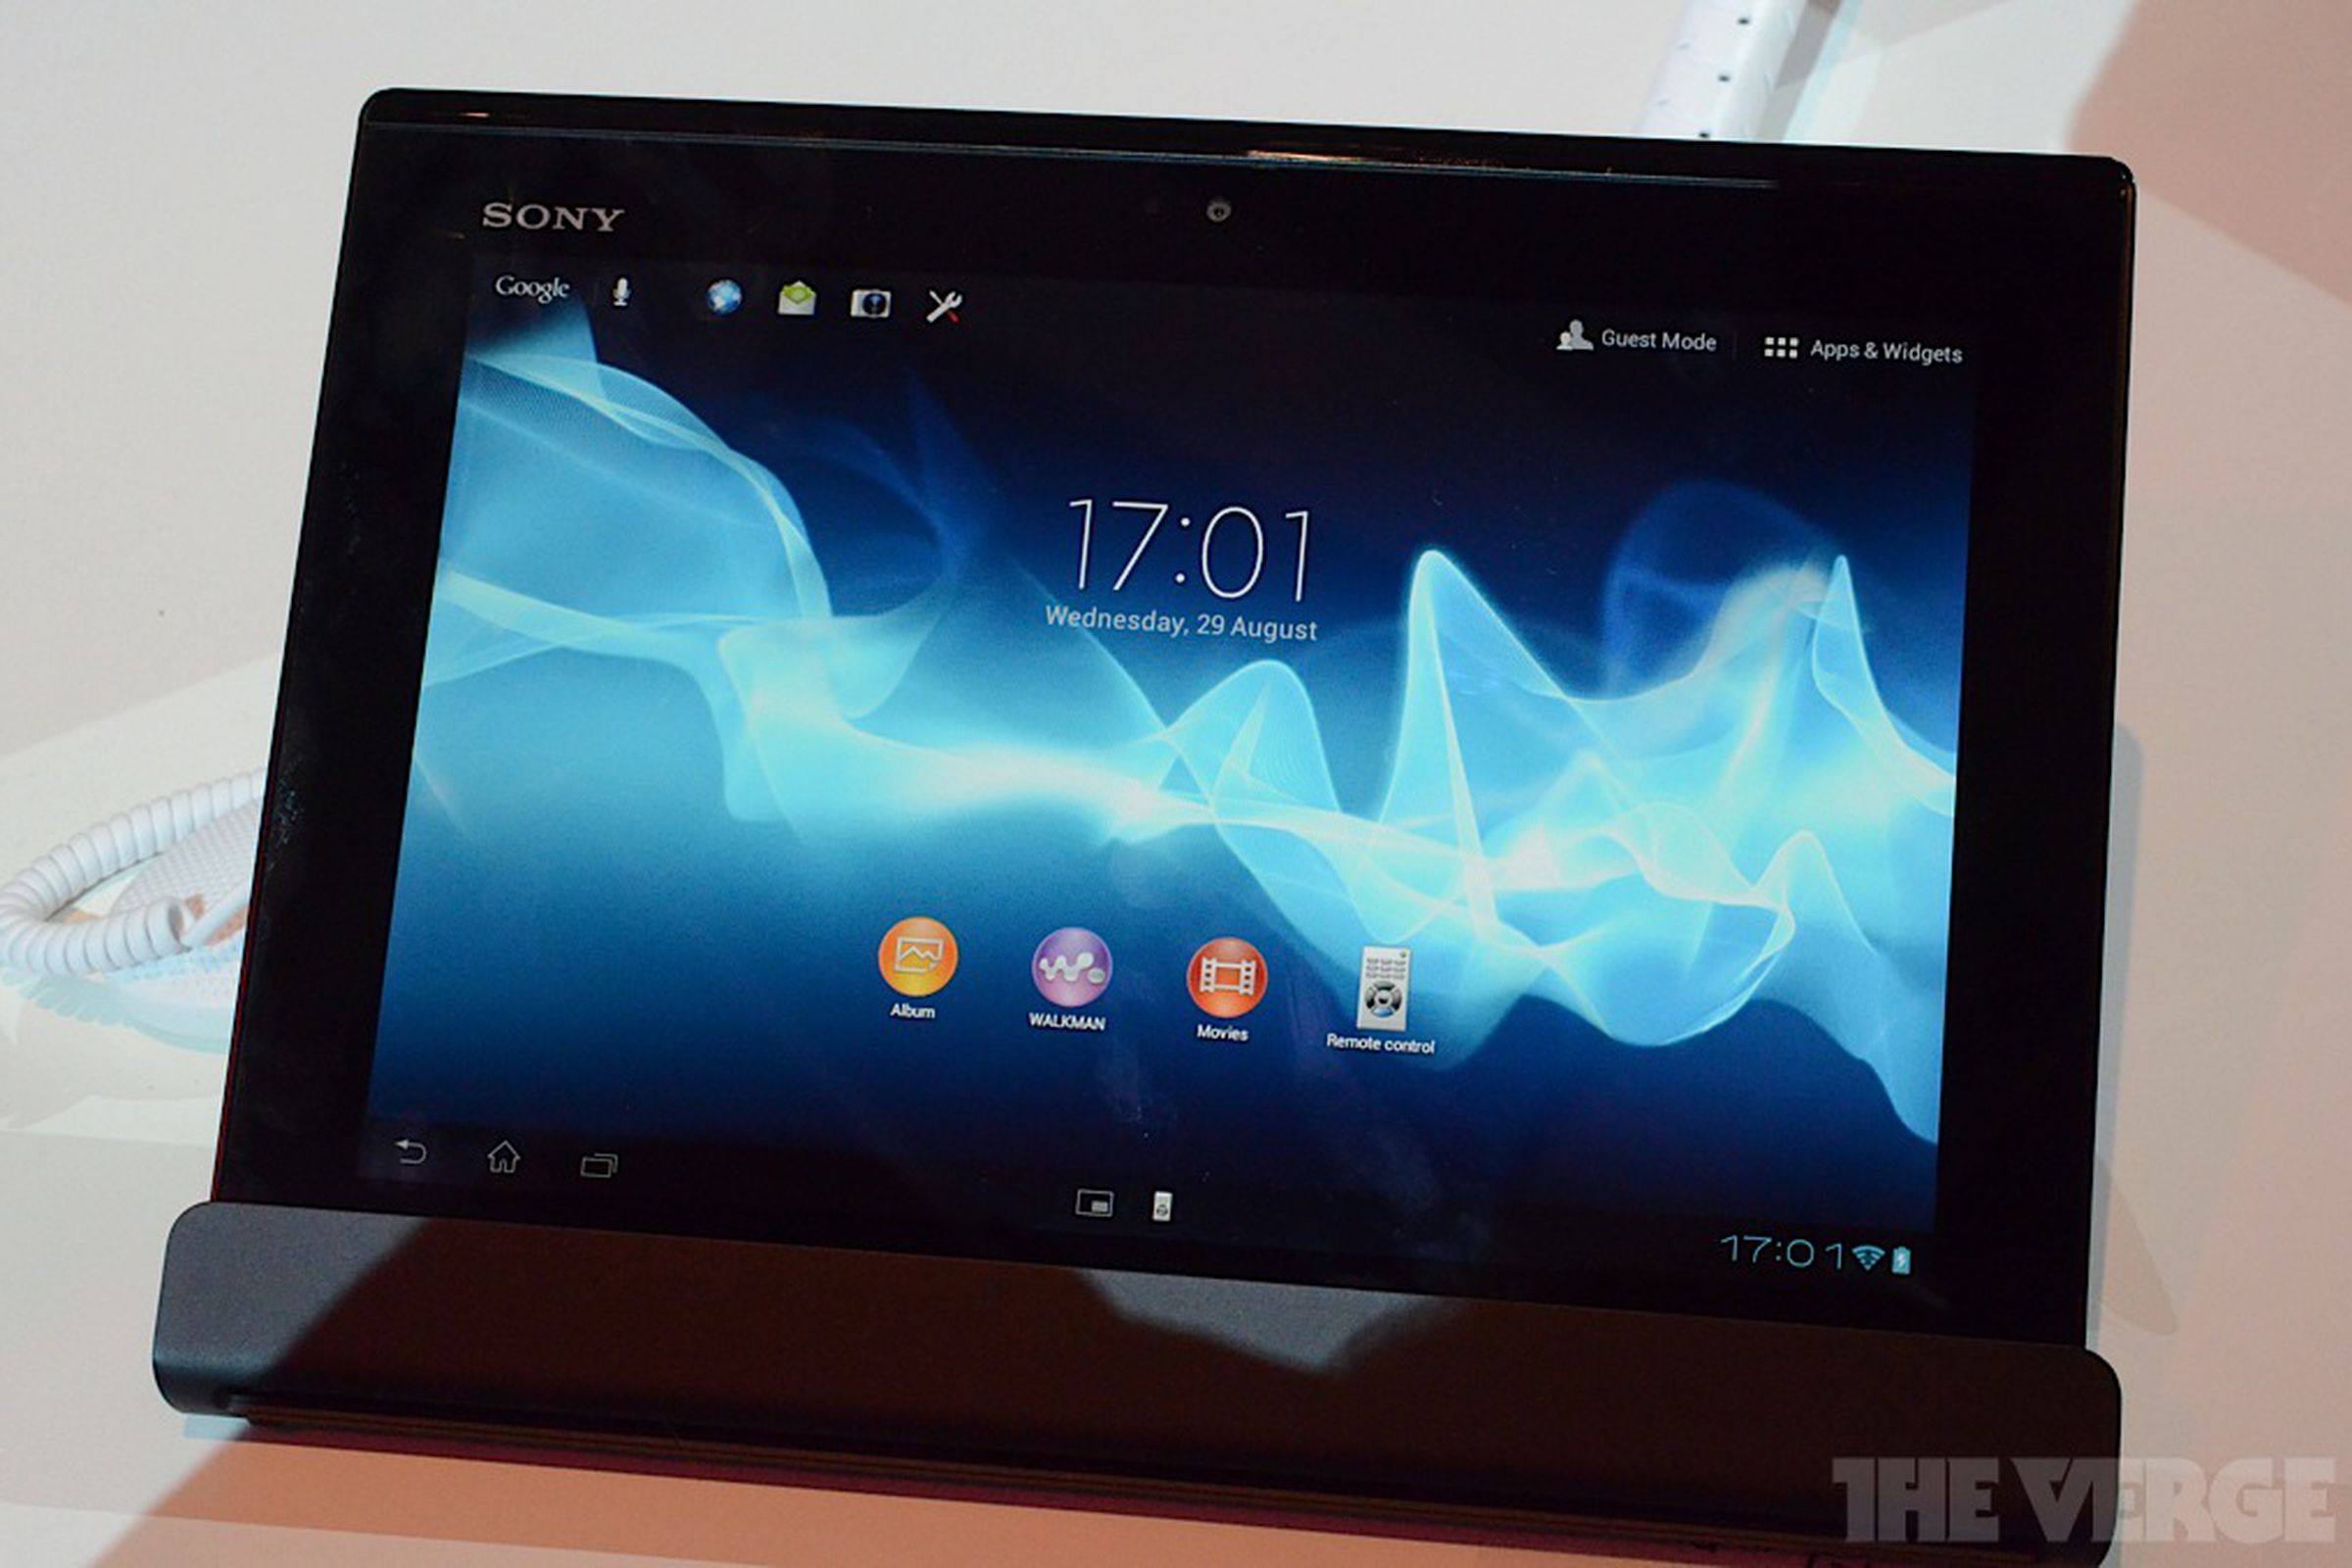 Gallery Photo: Sony Xperia Tablet S hands-on pictures from IFA 2012